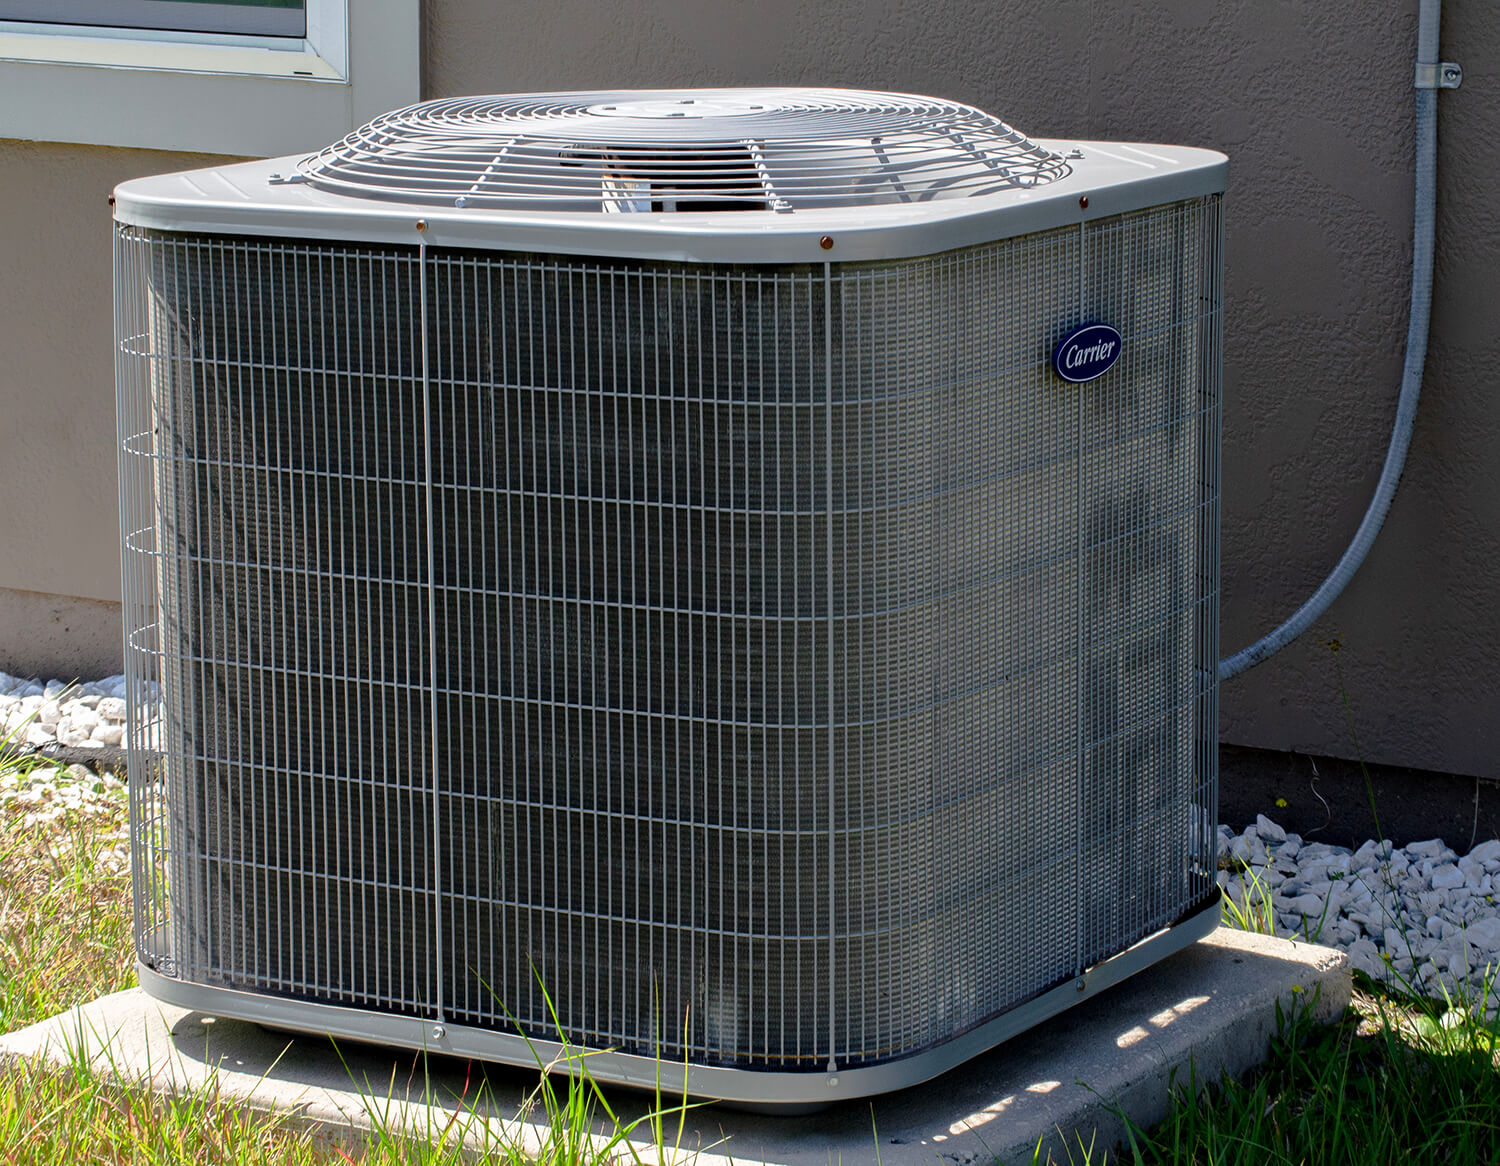 I had a rough experience with a Heating, Ventilation as well as A/C company